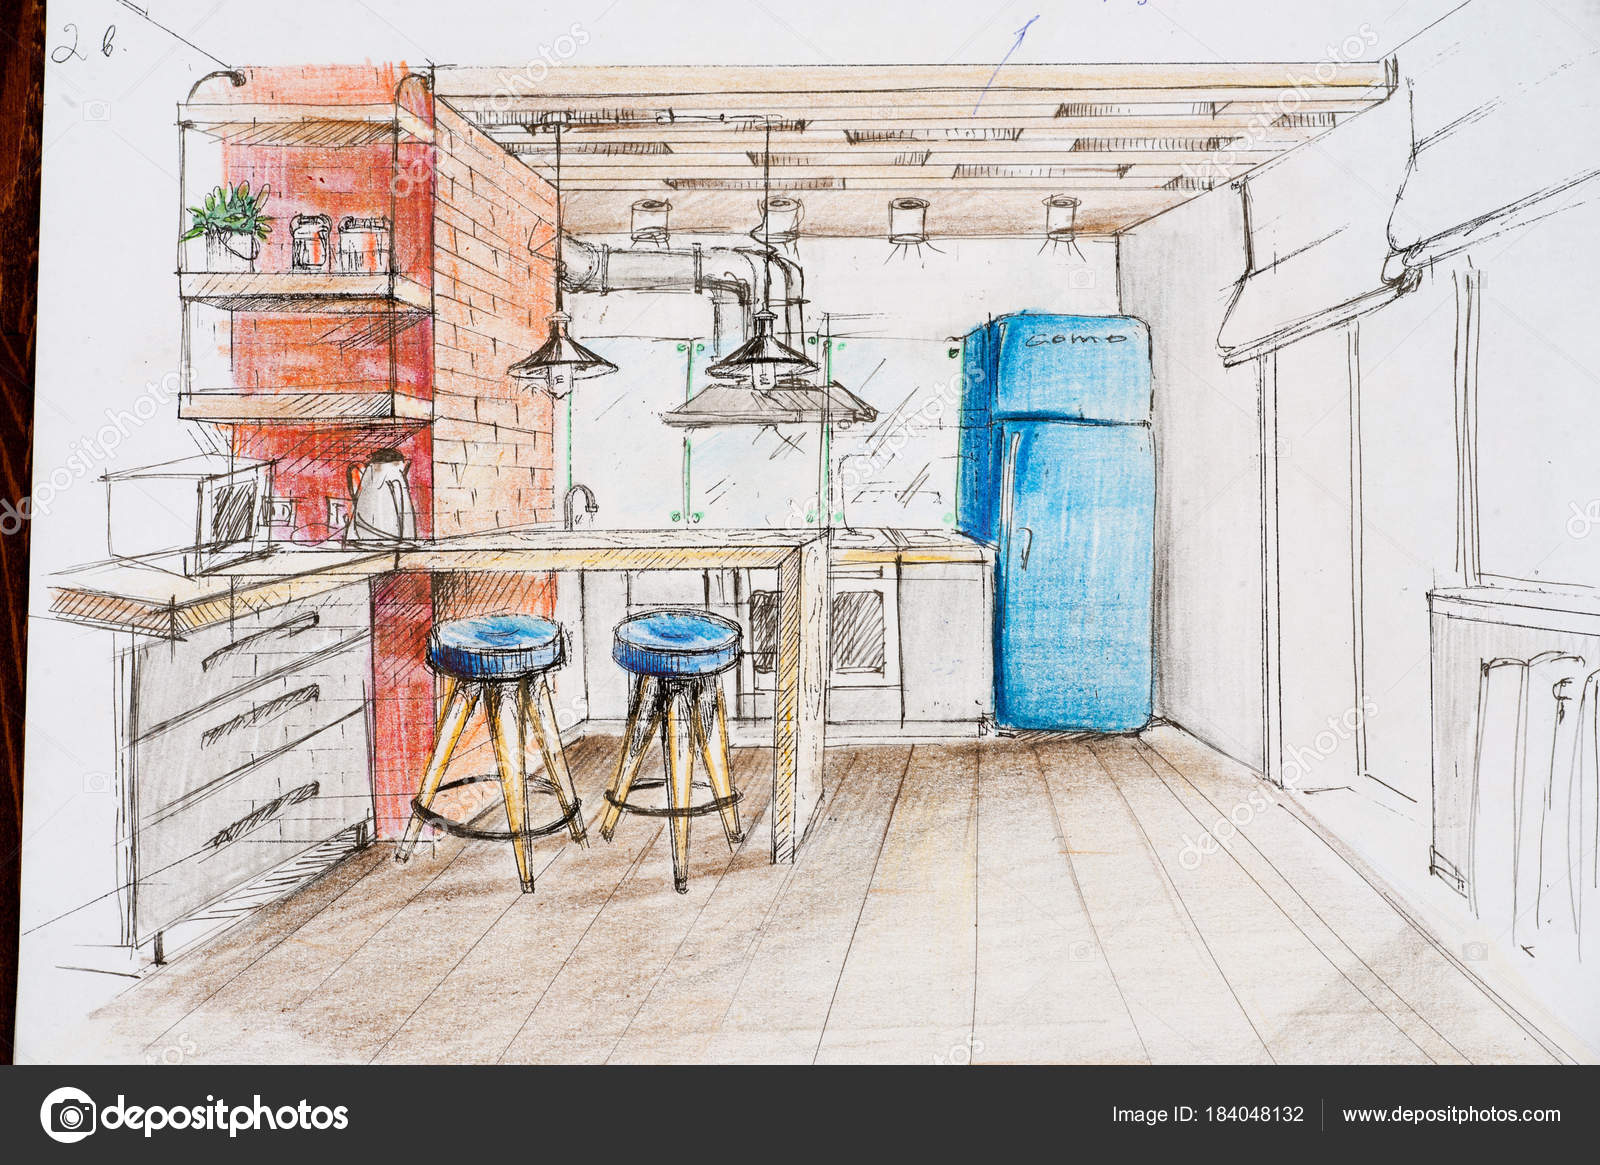 ArtStation - Preliminary perspective for the interior design of a house